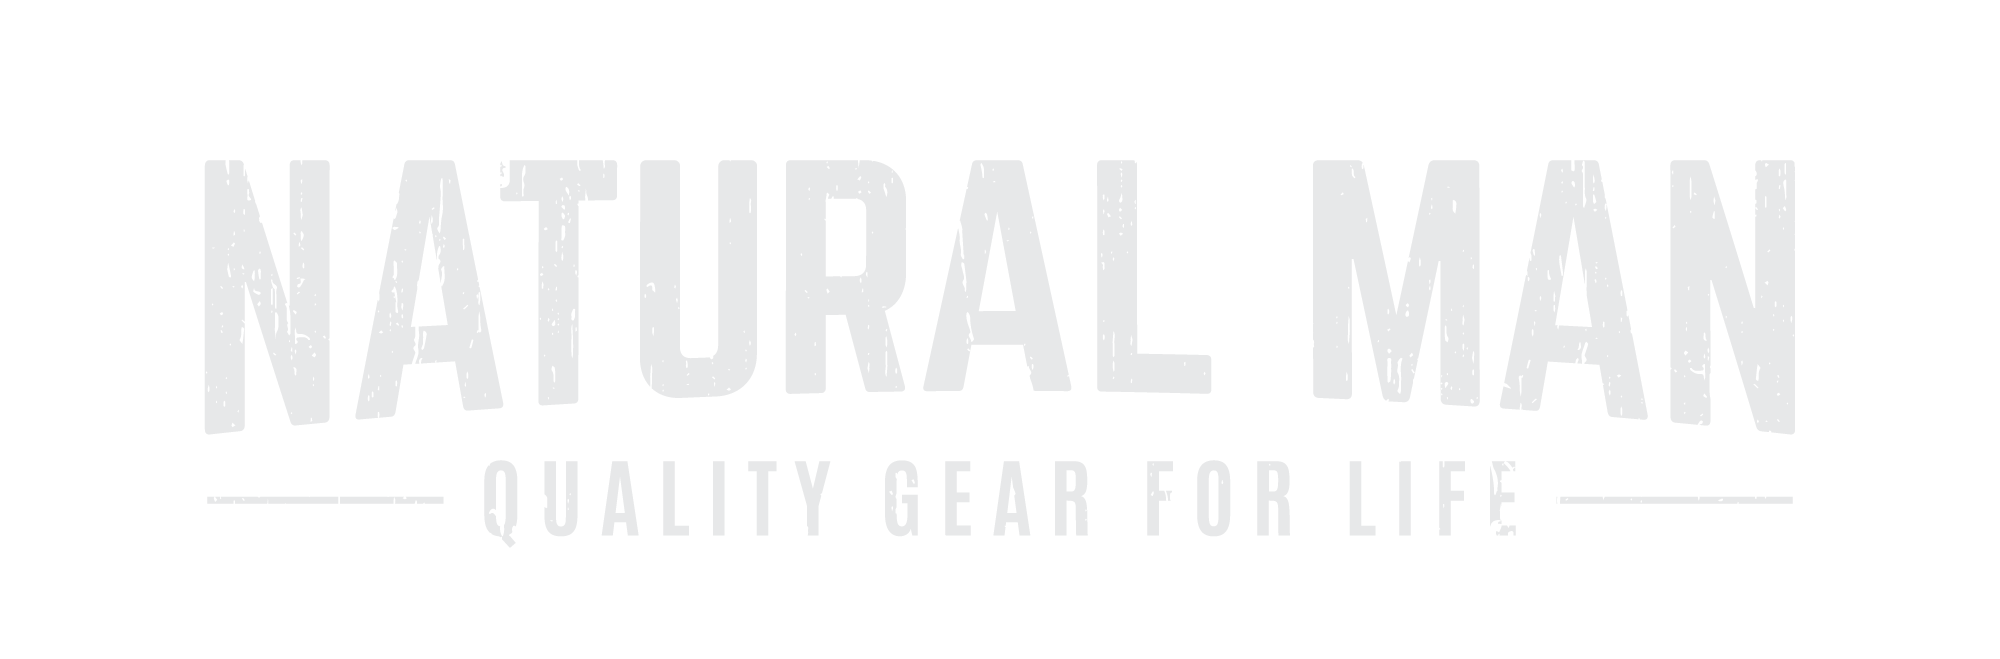 Natural Man - Outdoor Clothing and Equipment Shop for Quality Gear